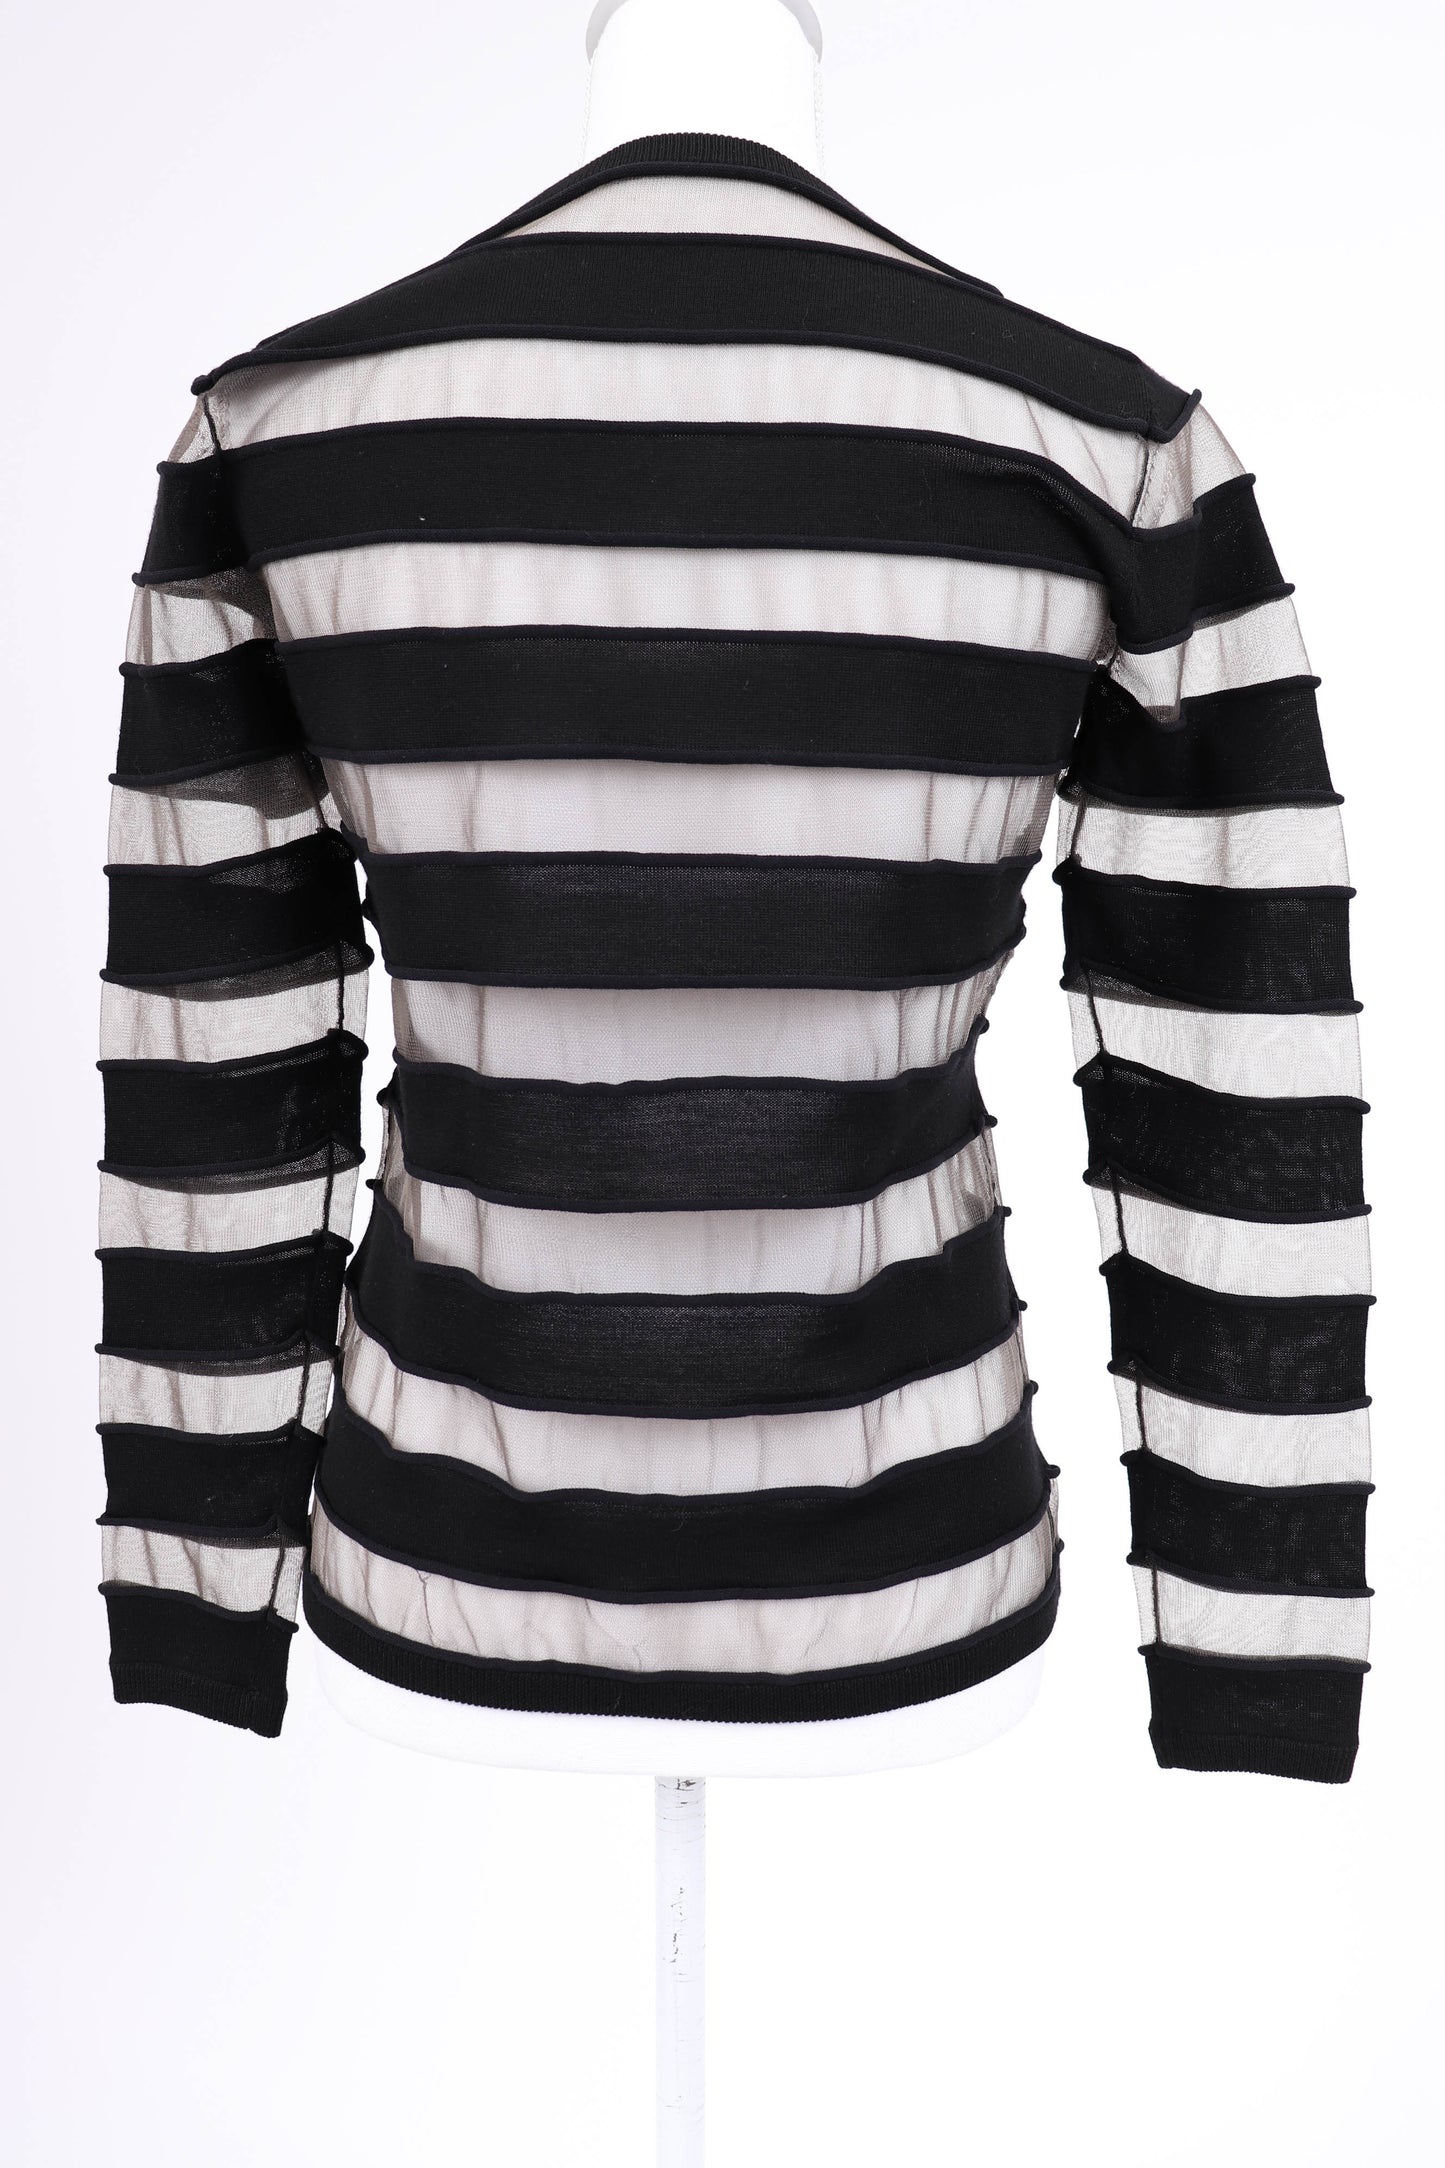 00's Black and Sheer Striped Cardigan XS/S